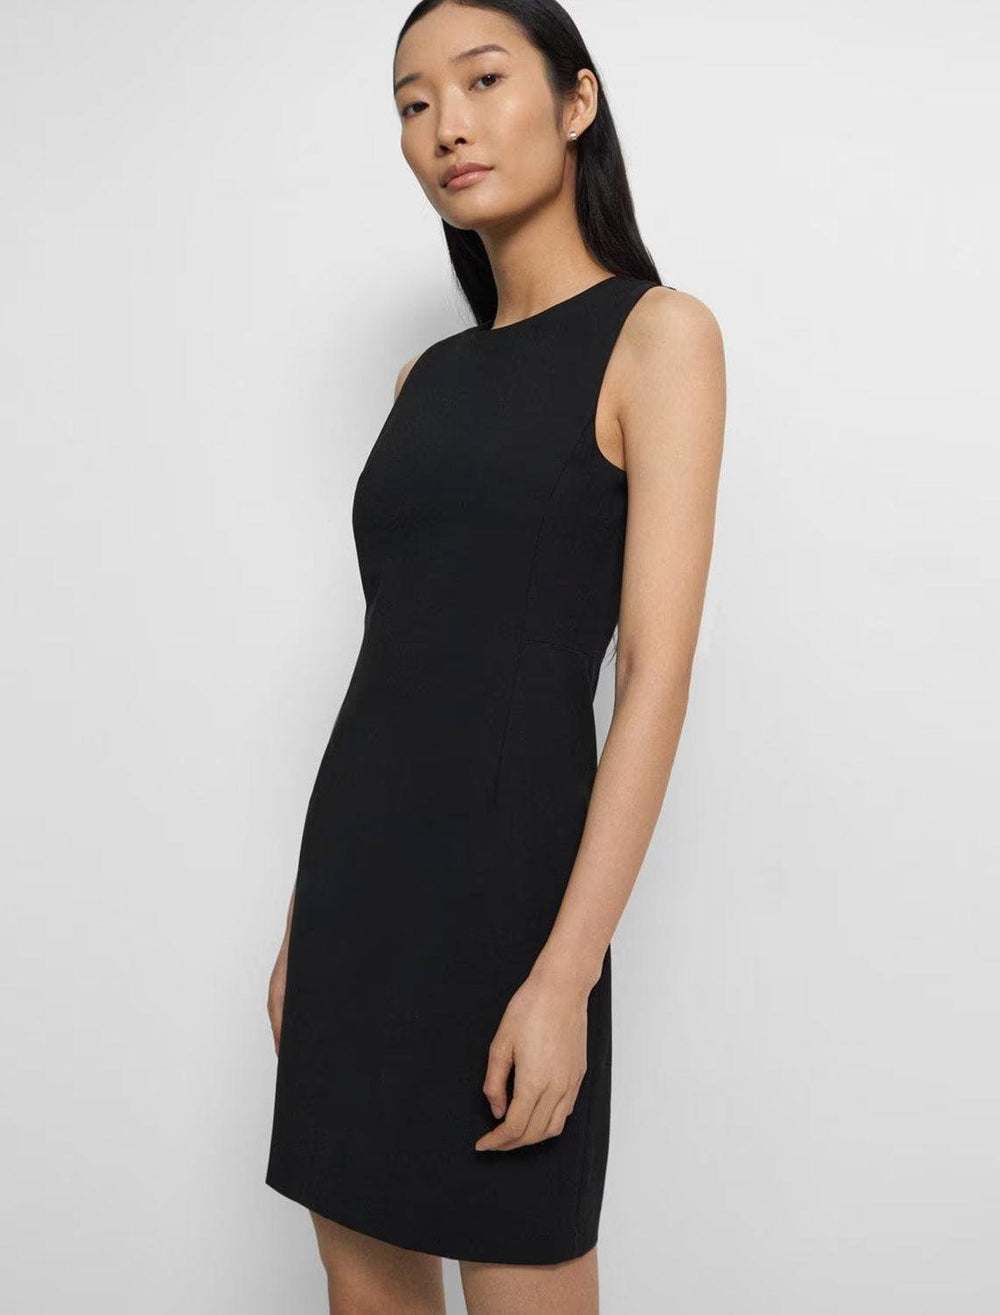 Model wearing Theory's sleeveless fitted dress in traceable wool.